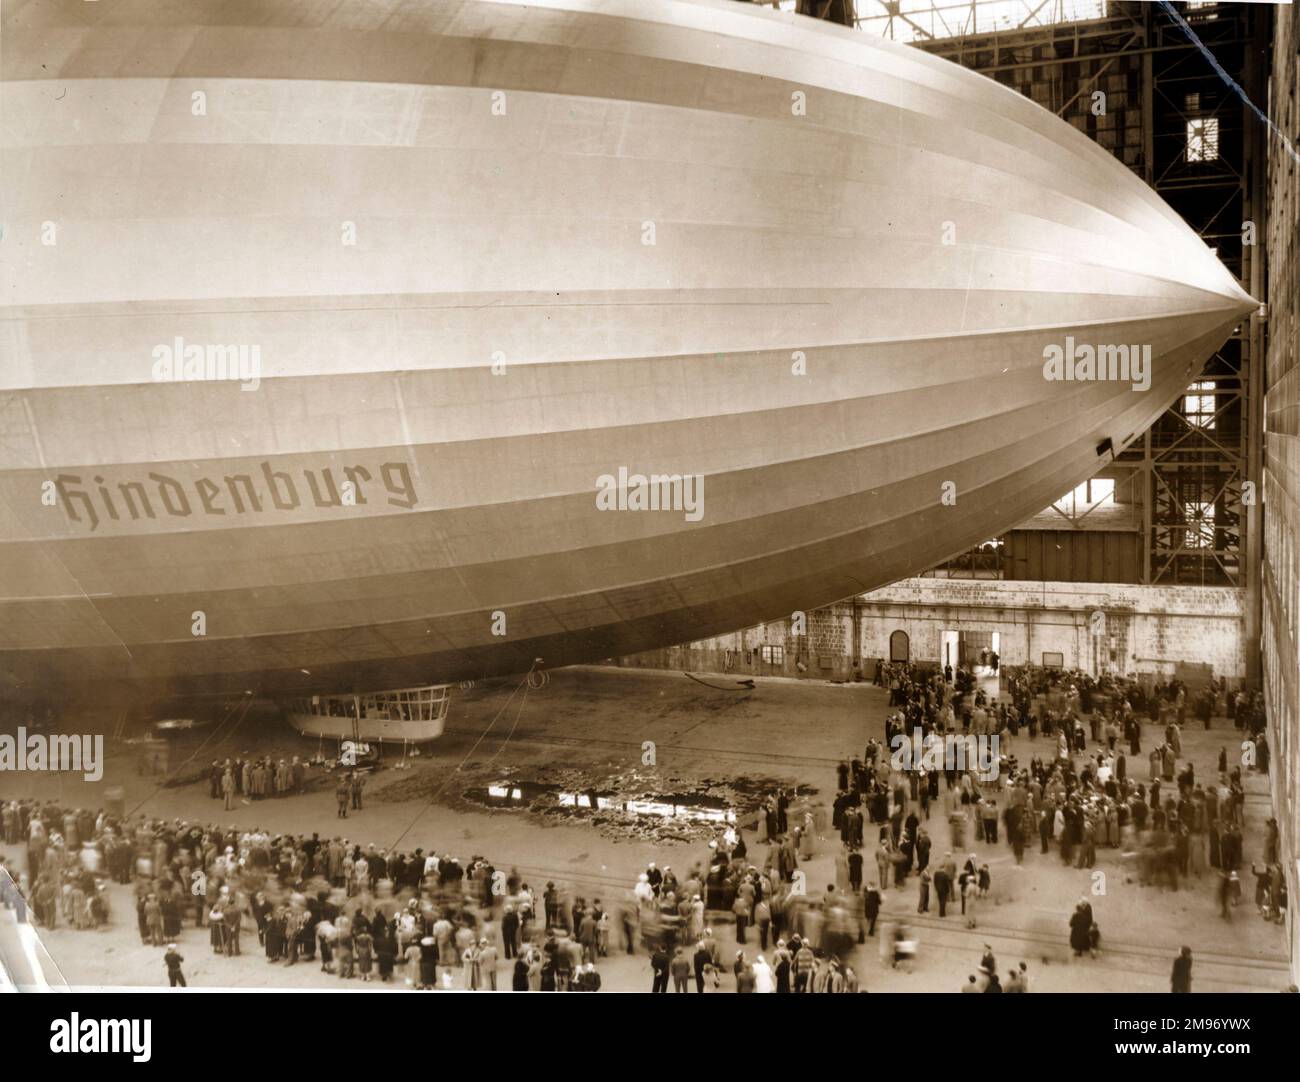 Luftschiffbau Zeppelin LZ 129 Hindenburg after its arrival at Lakehurst, New Jersey, 10 May 1936, following its first flight to North America from Friedrichshafen. The Hindenburg was intended to carry 50 passengers in luxury in a regularly scheduled service across the North Atlantic, however its destruction by fire while landing at Lakehurst during the early hours of 7 May 1937 effectively ended the ‘golden age’ of the large passenger airships witnessed during the 1930s. Stock Photo